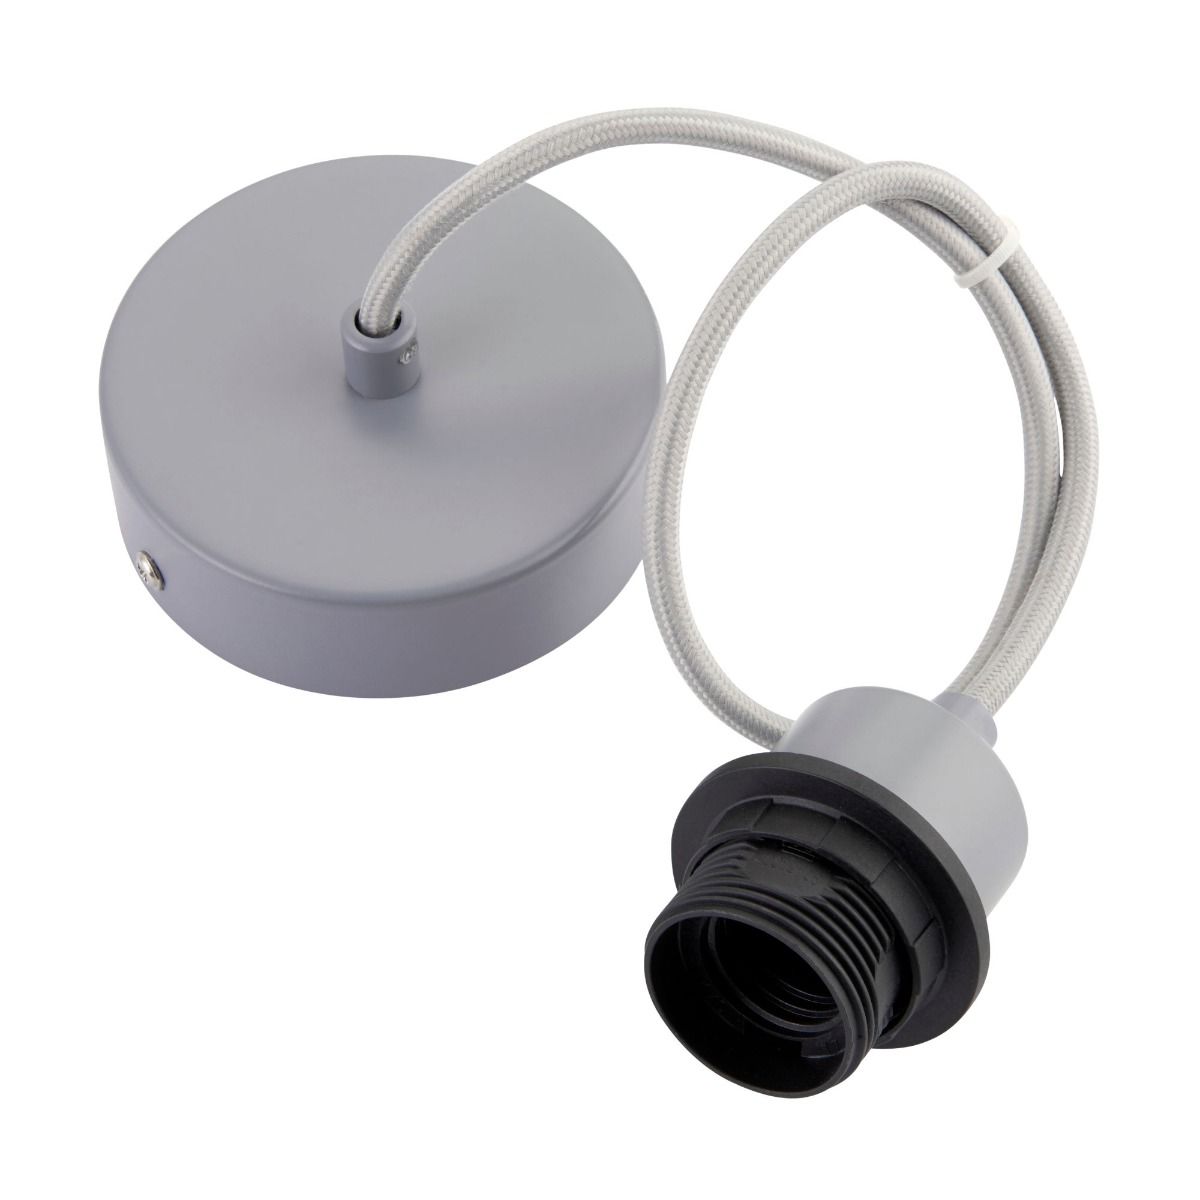 Cable Set Grey Steel Lamp Holder